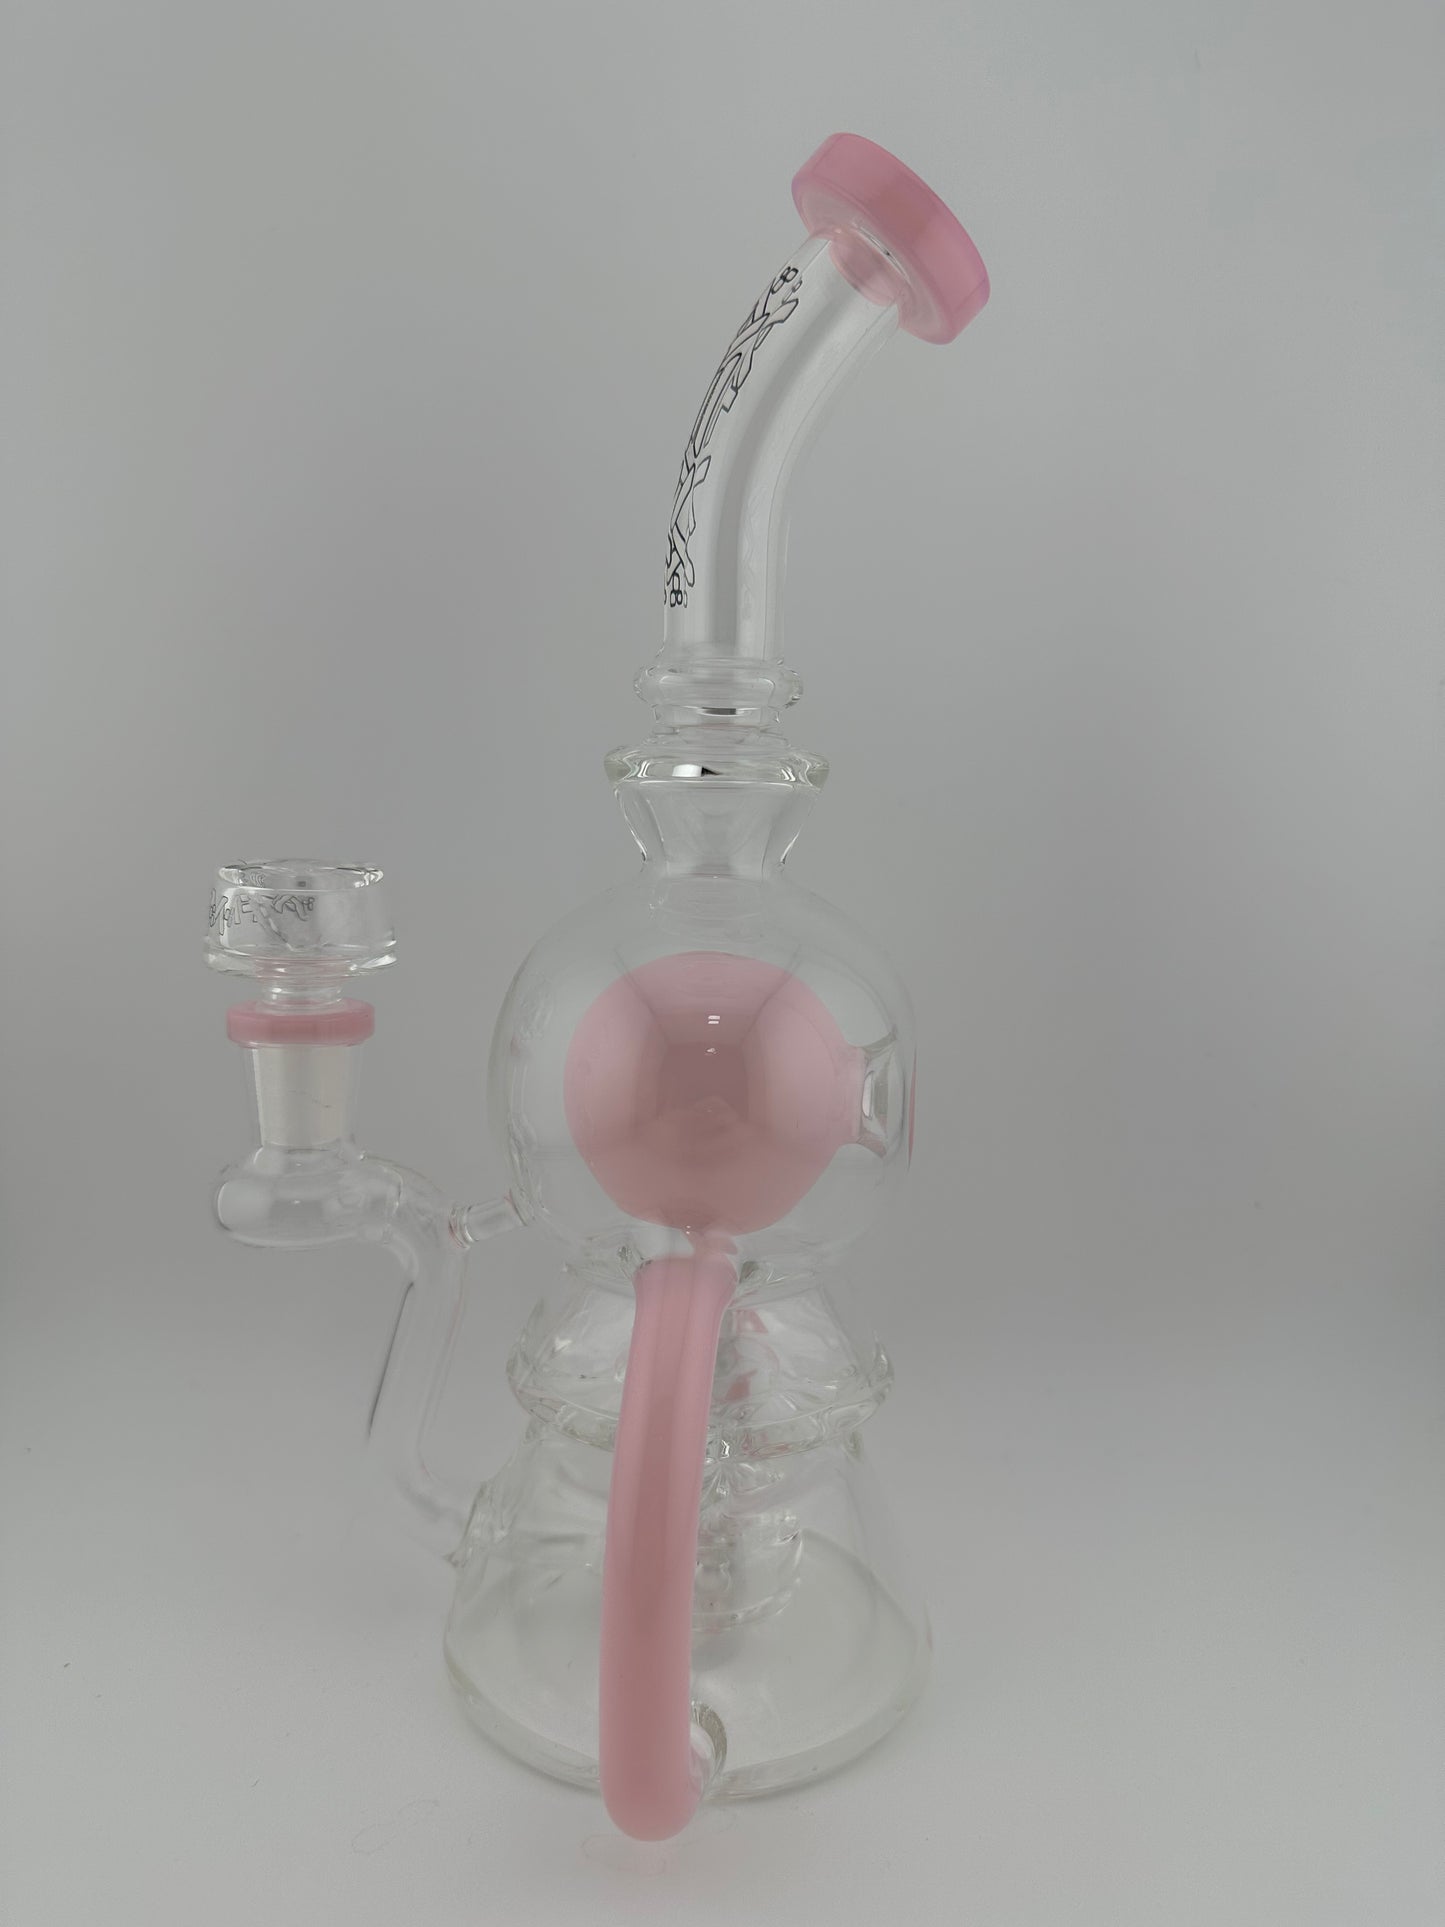 AFM Glass 9" Double Pump Recycler 14mm